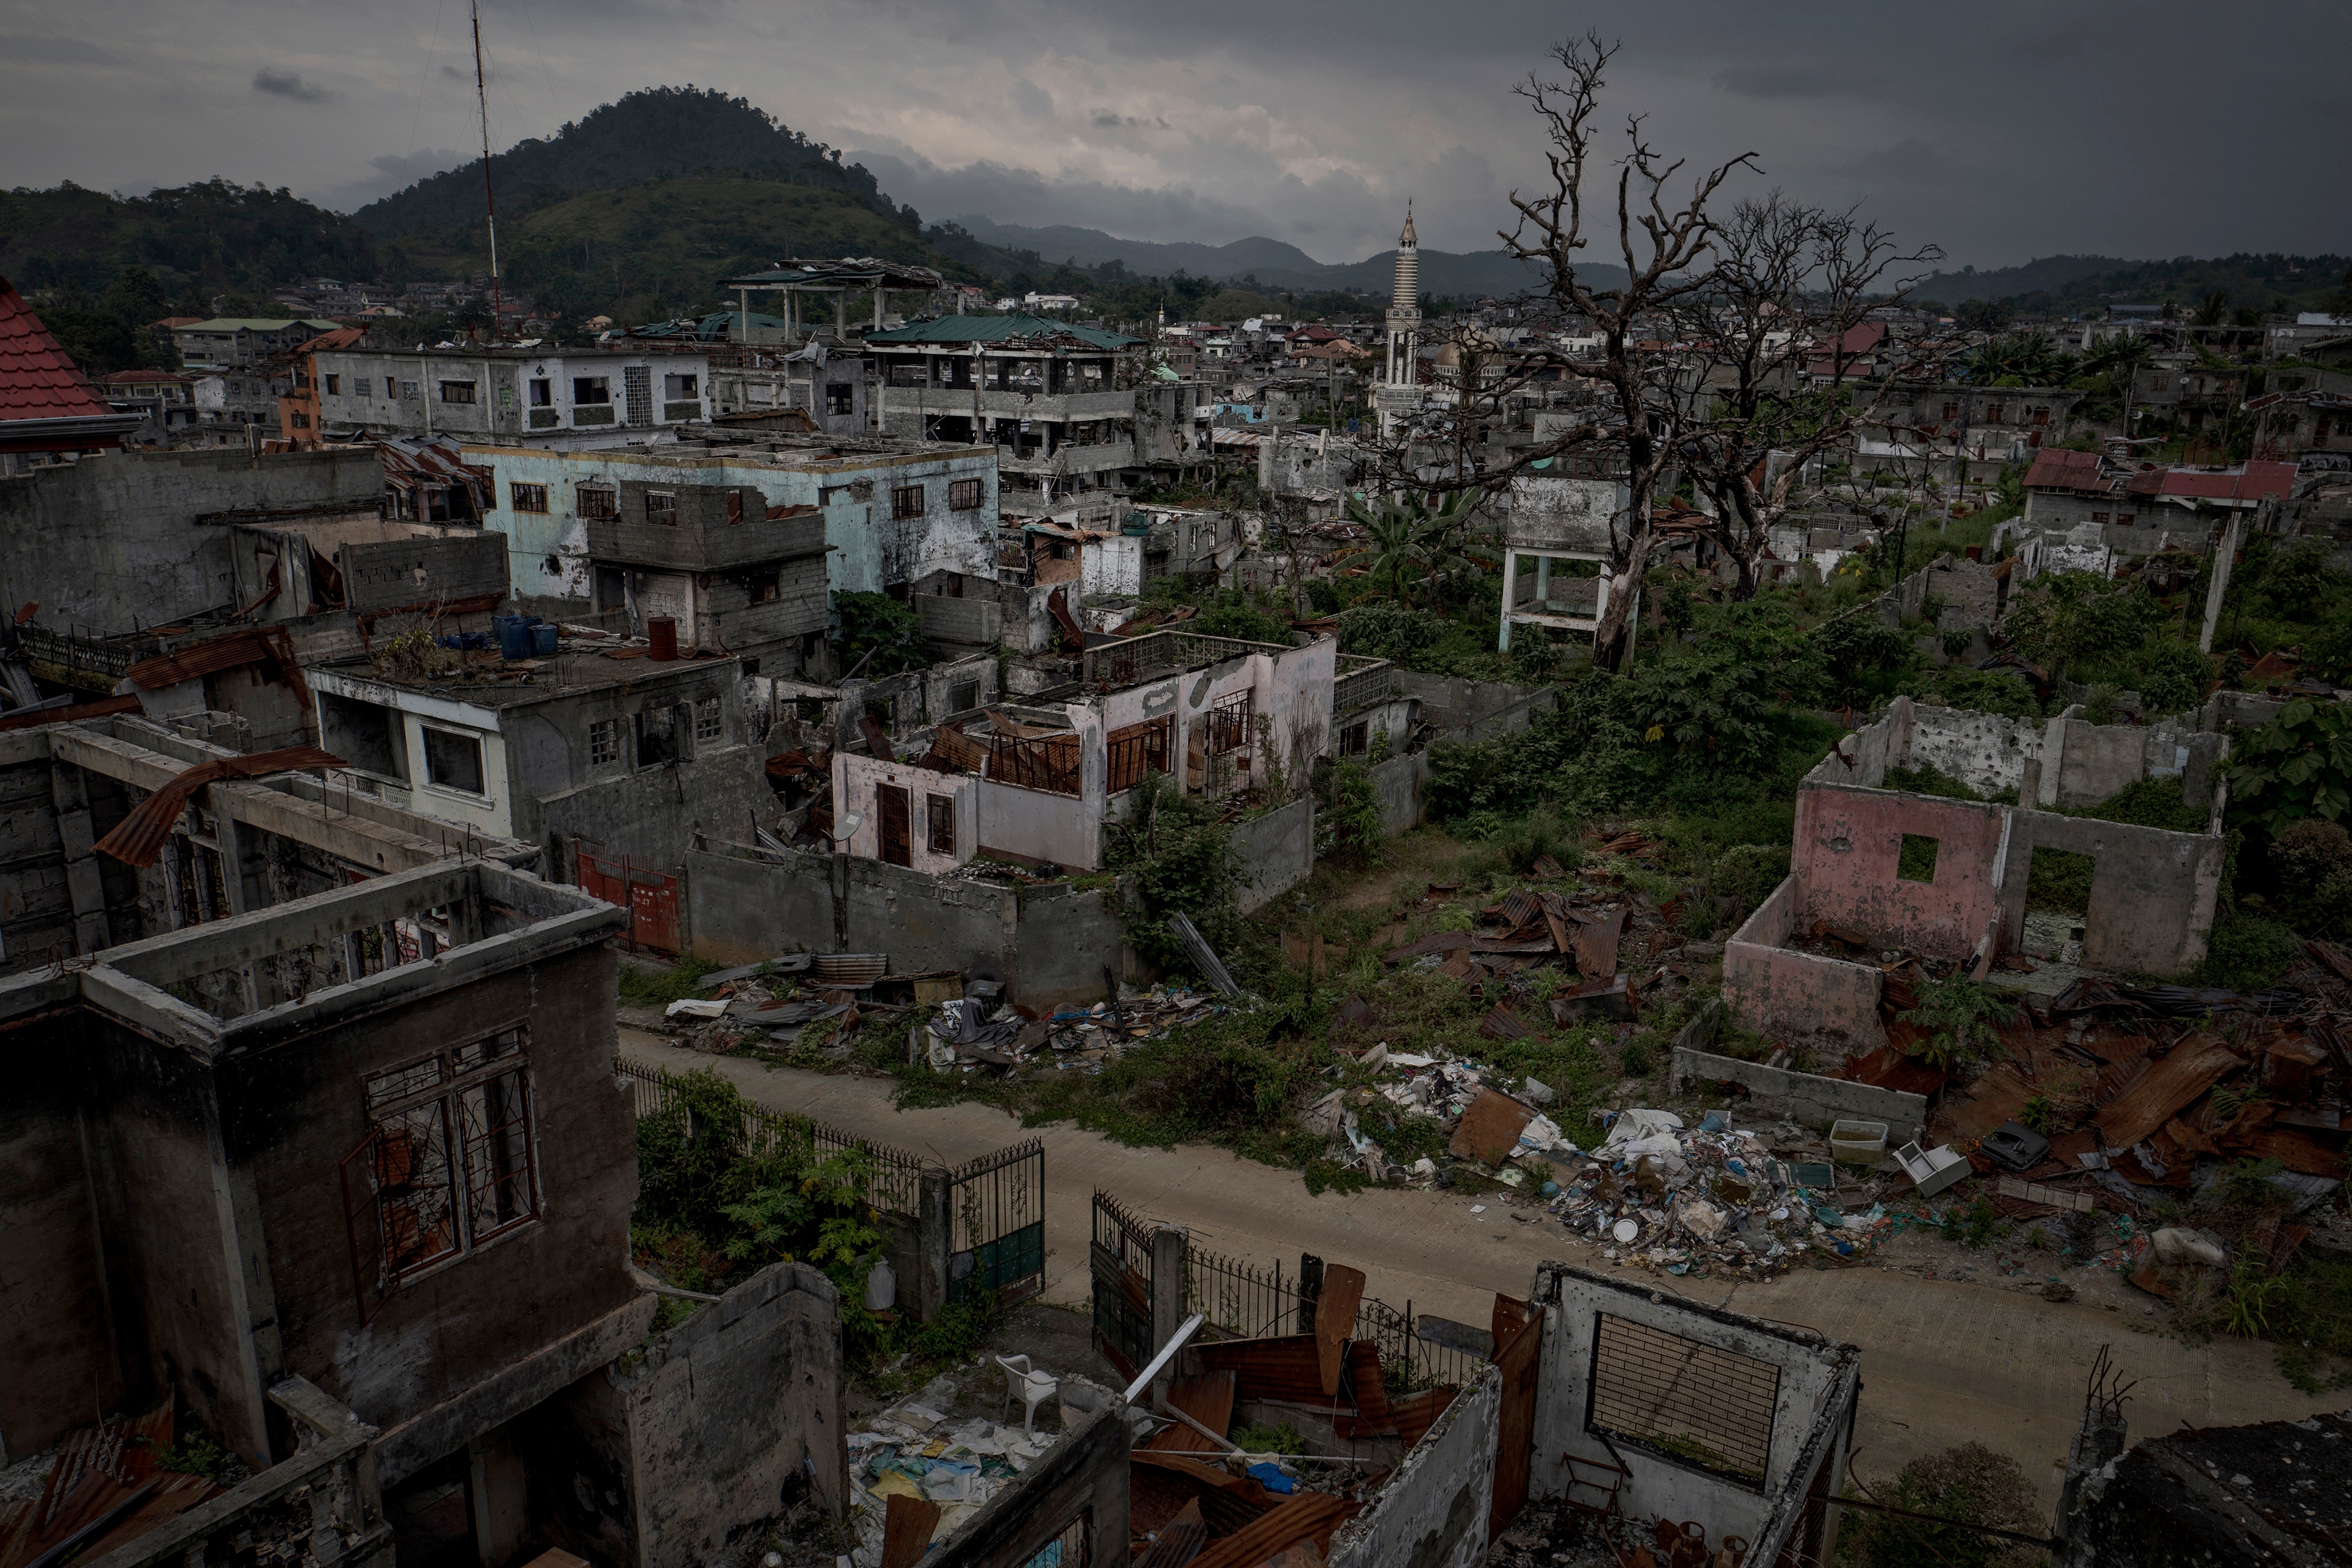 Marawi, the largest Muslim majority city in the Philippines, which was taken over by Islamic State insurgents and lay in ruins by the time the army prevailed.